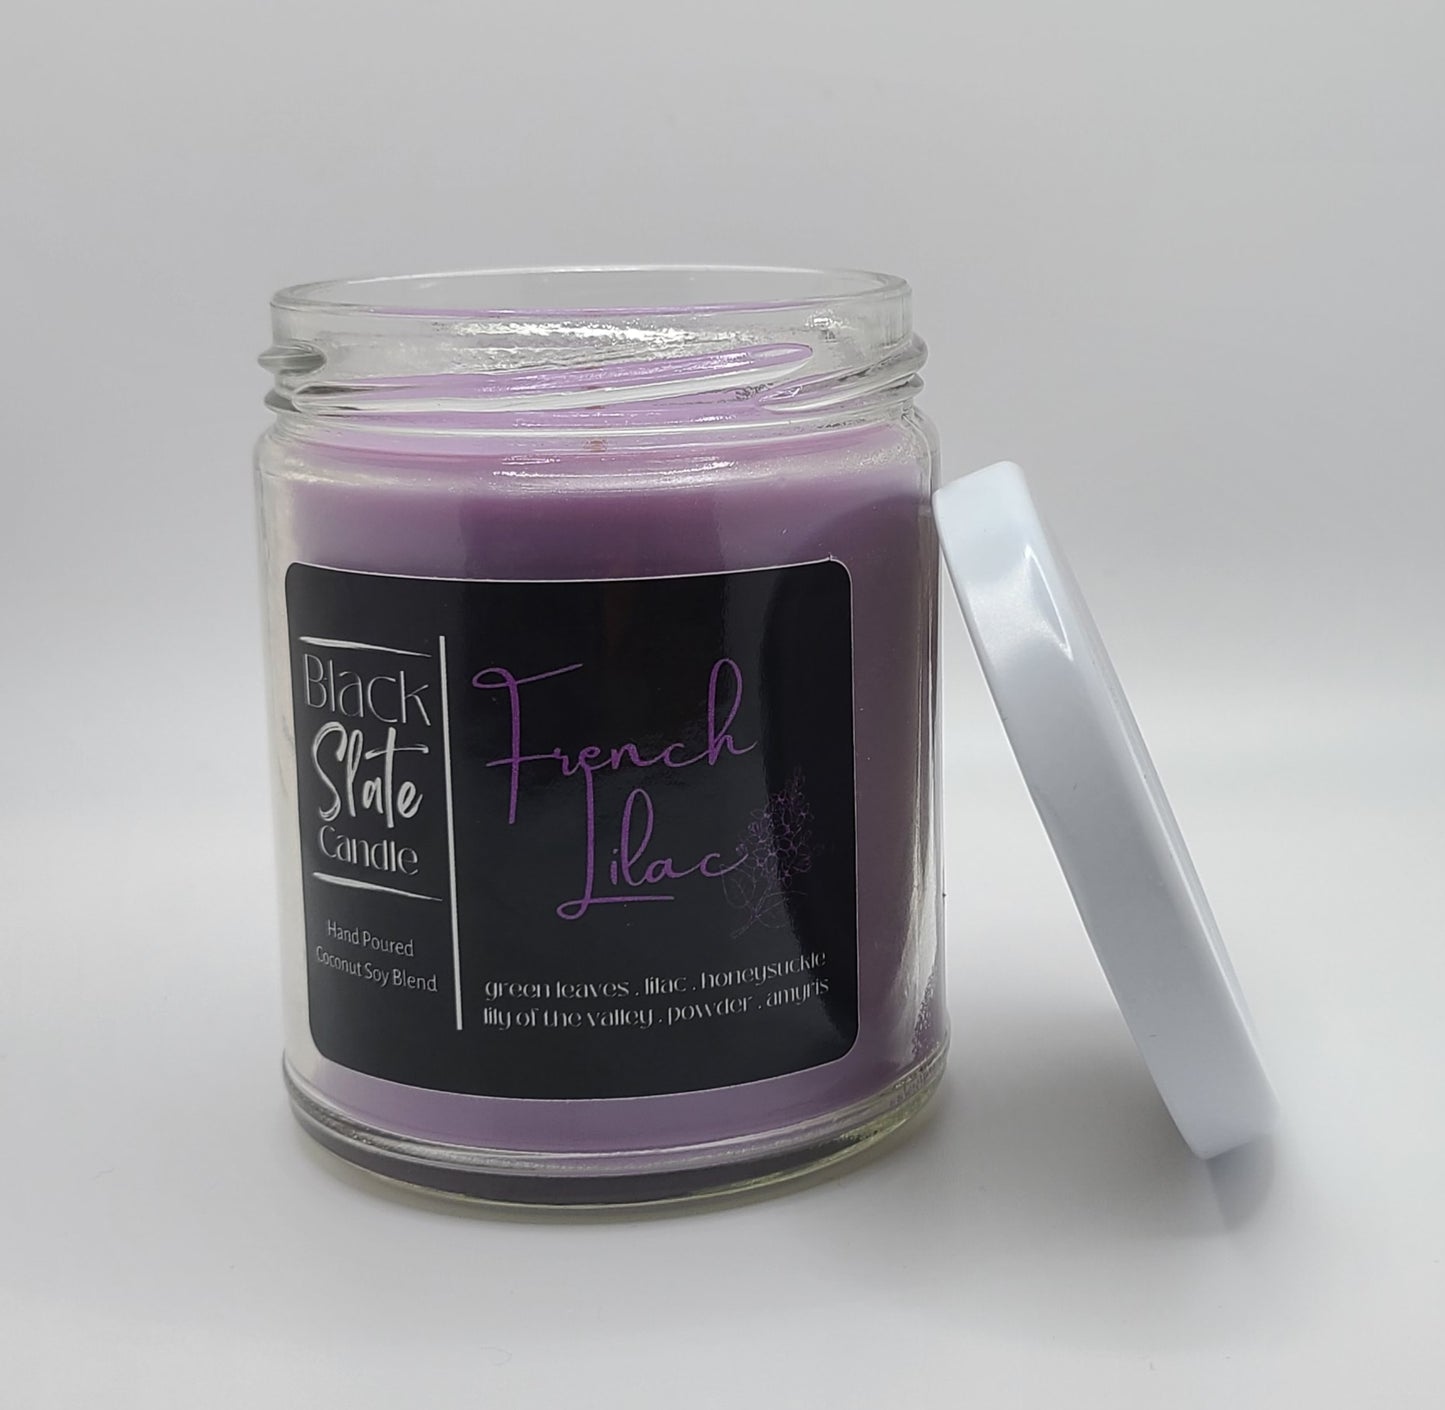 French Lilac